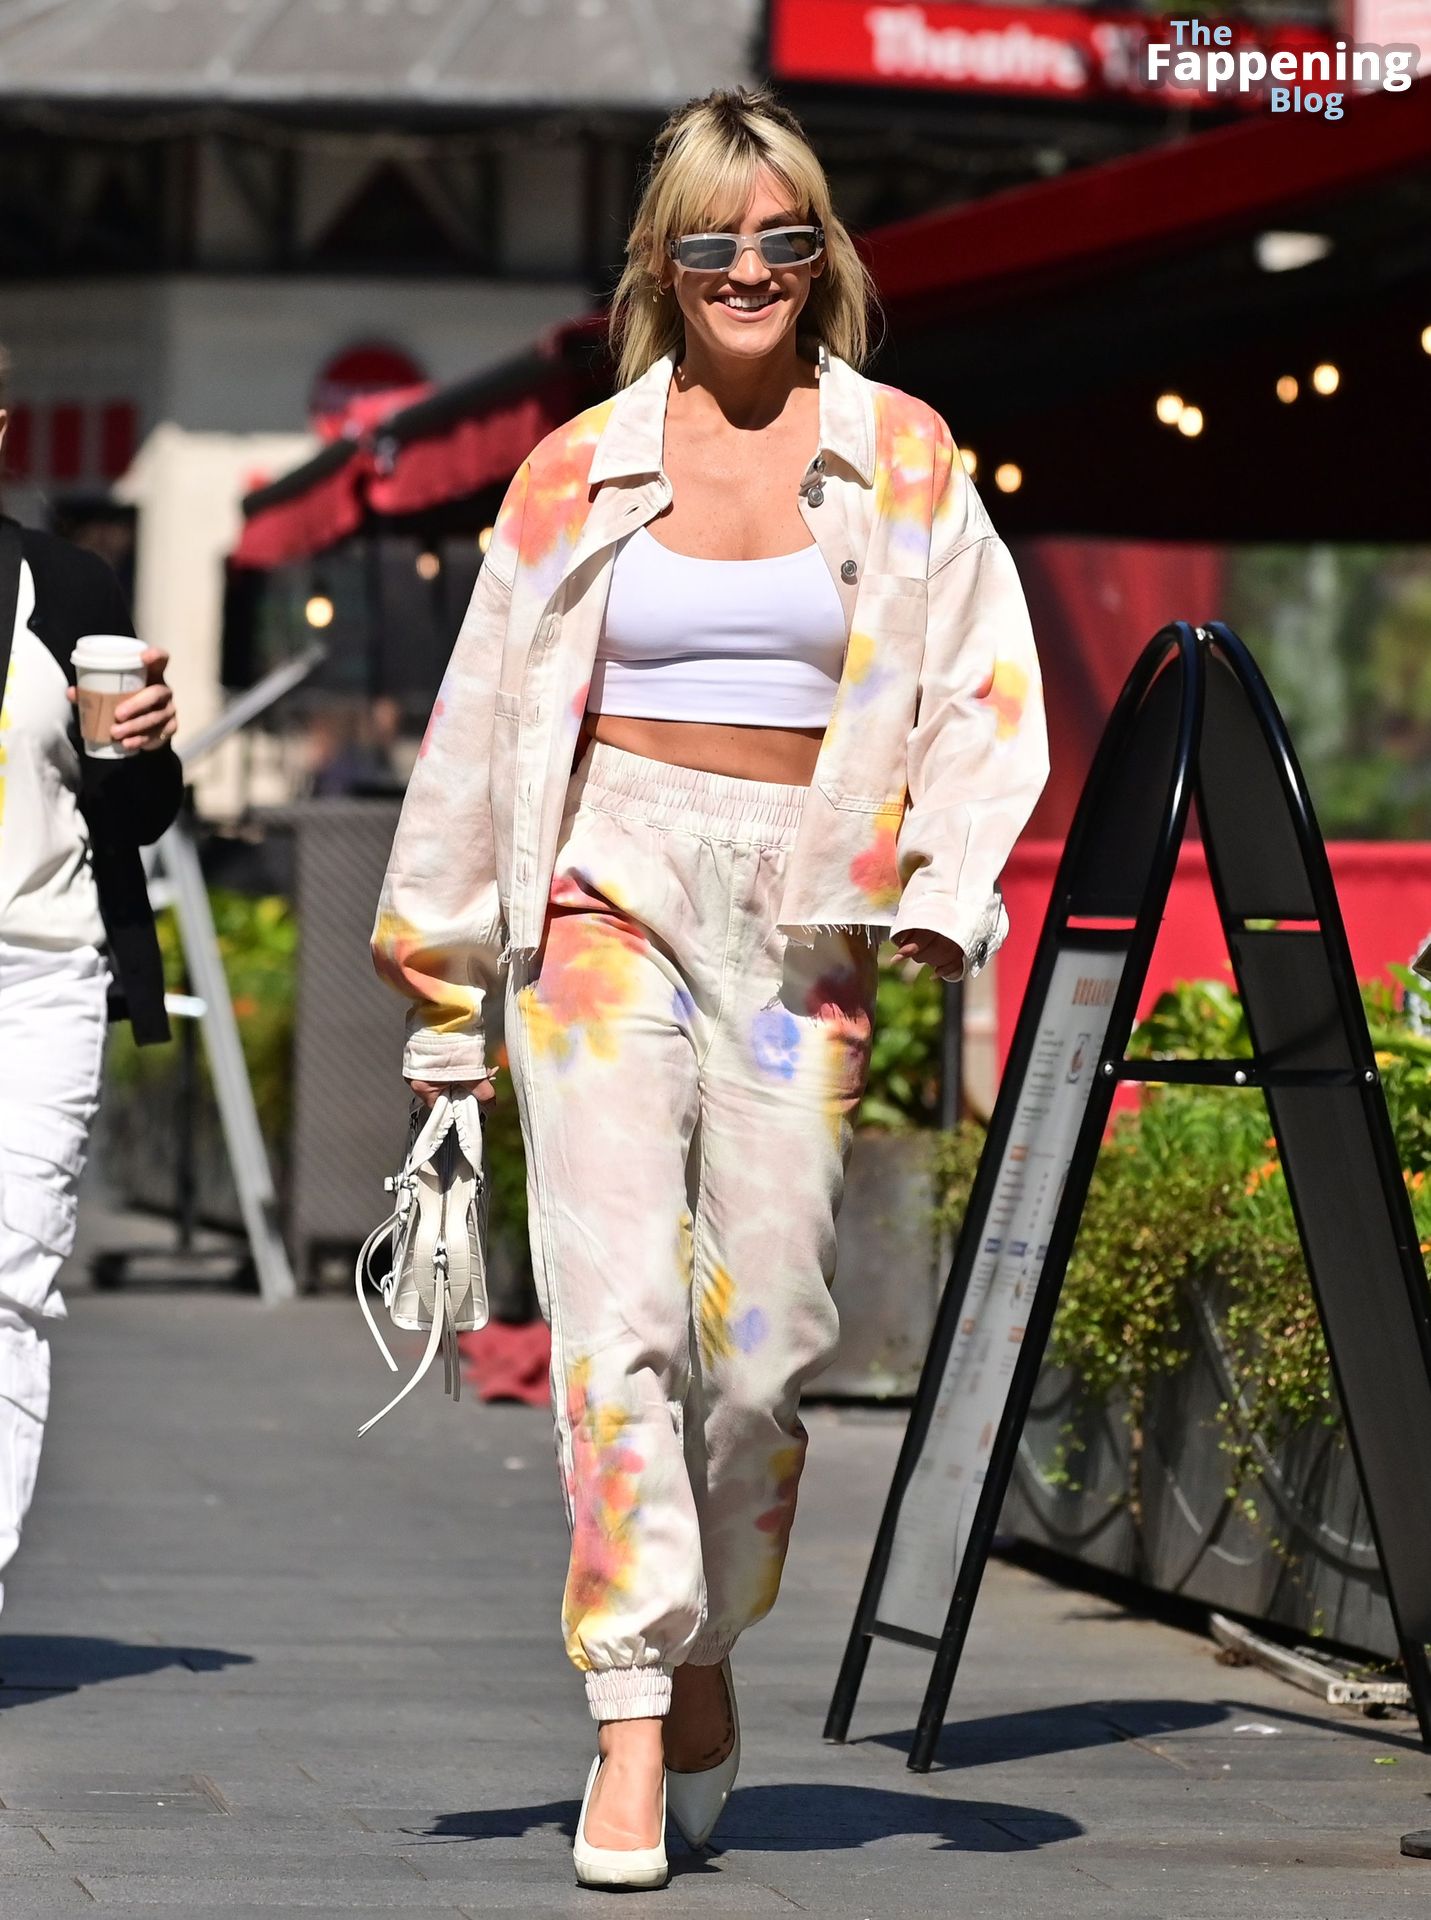 Ashley Roberts Shows Off Her Pokies in a White Top (7 Photos)